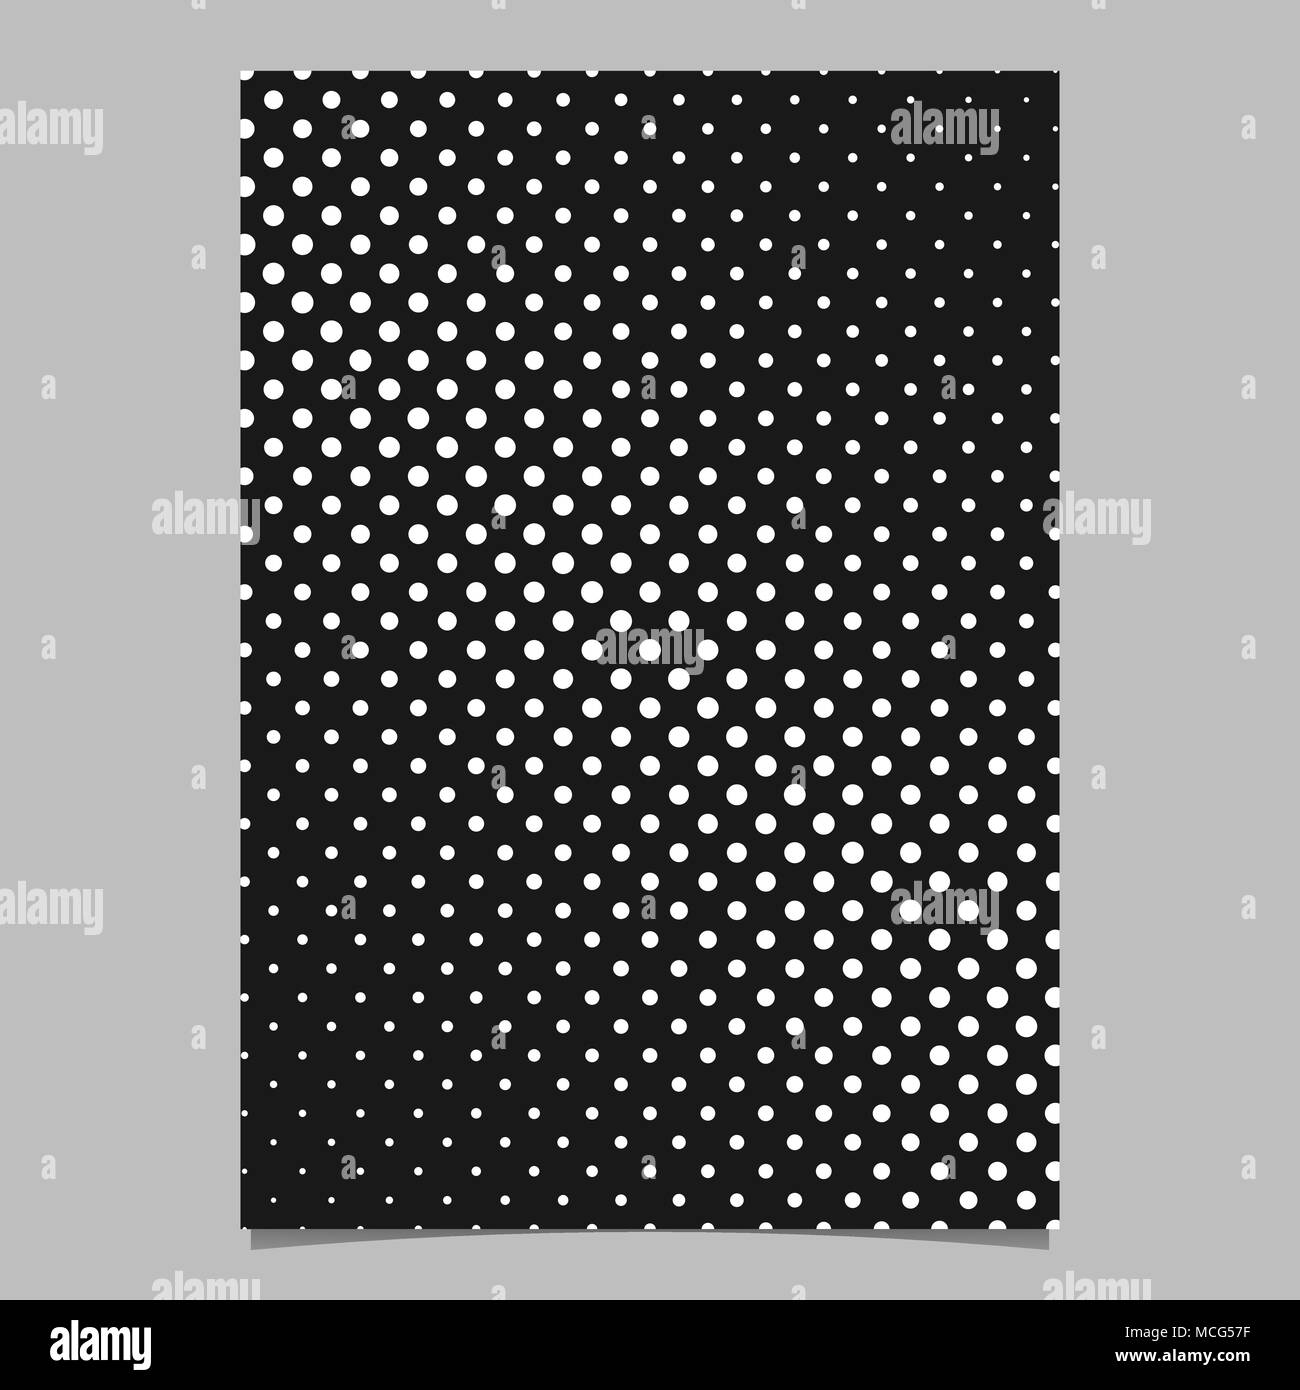 Abstract halftone circle pattern background flyer template Stock Vector